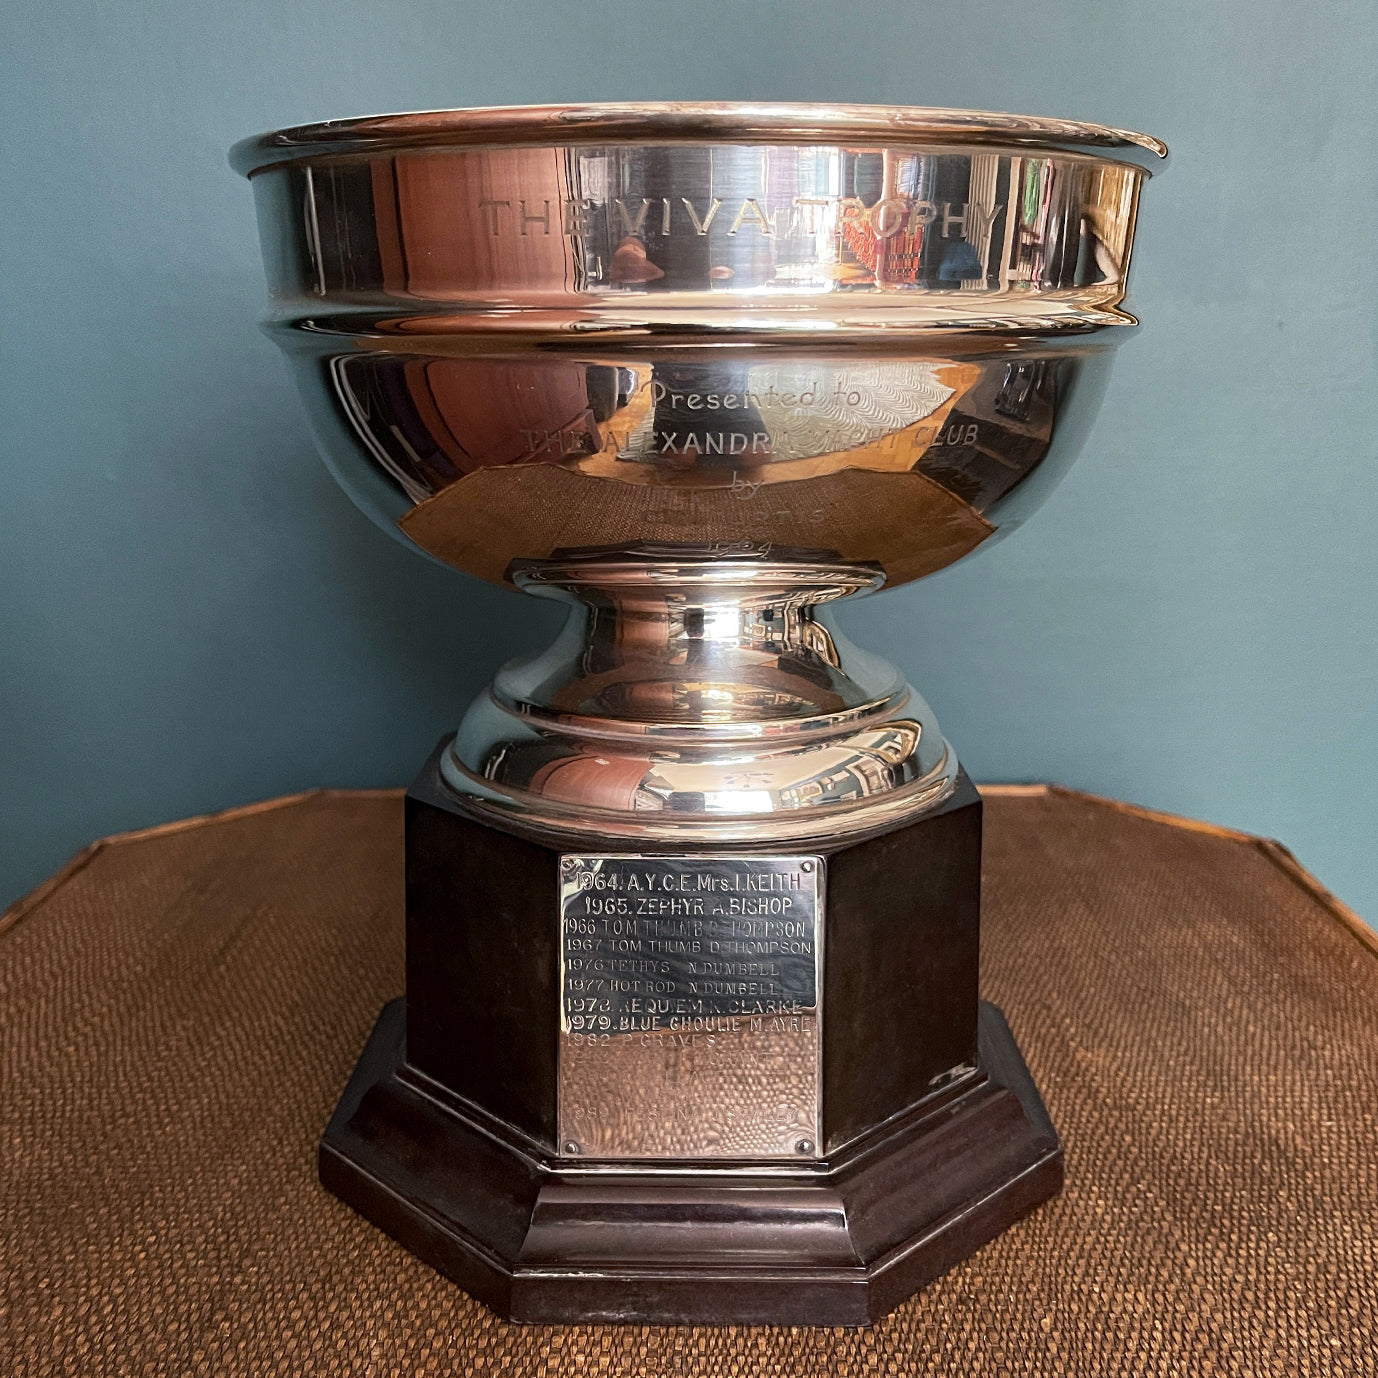 A Silver Plate Yacht Club Trophy from the Southend on Sea Alexandra Yacht Club. The Viva Trophy was first presented in 1964 through to 1989. The base is in bakelite and has a silver plated name plate displaying the names of the yachts and the skippers that have won - SHOP NOW - www.intovintage.co.uk